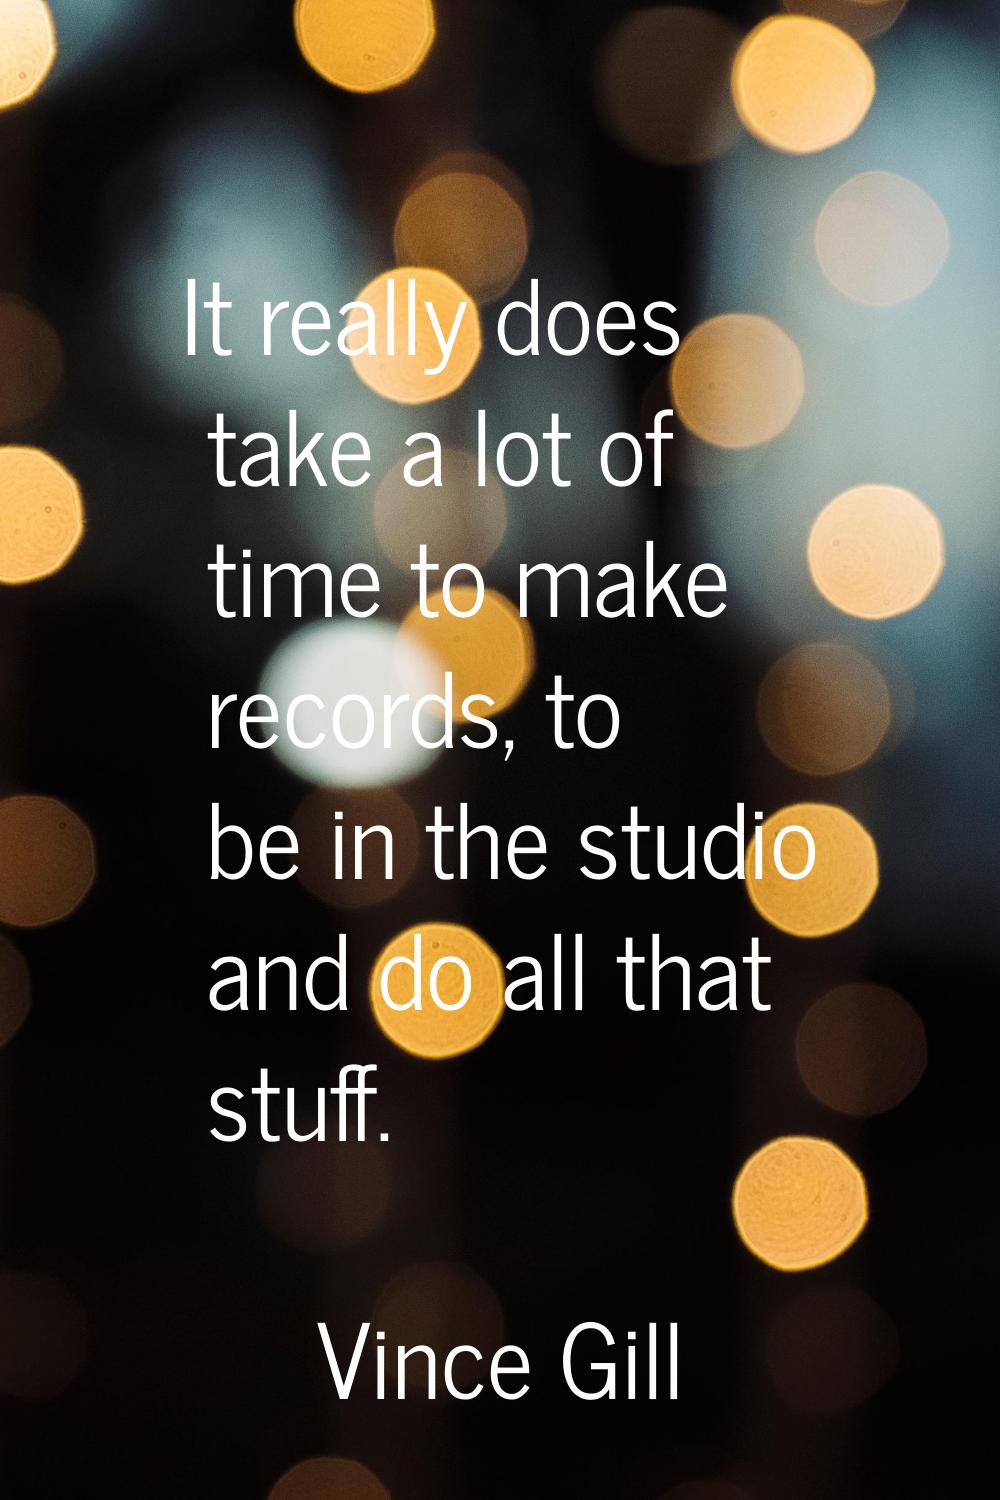 It really does take a lot of time to make records, to be in the studio and do all that stuff.